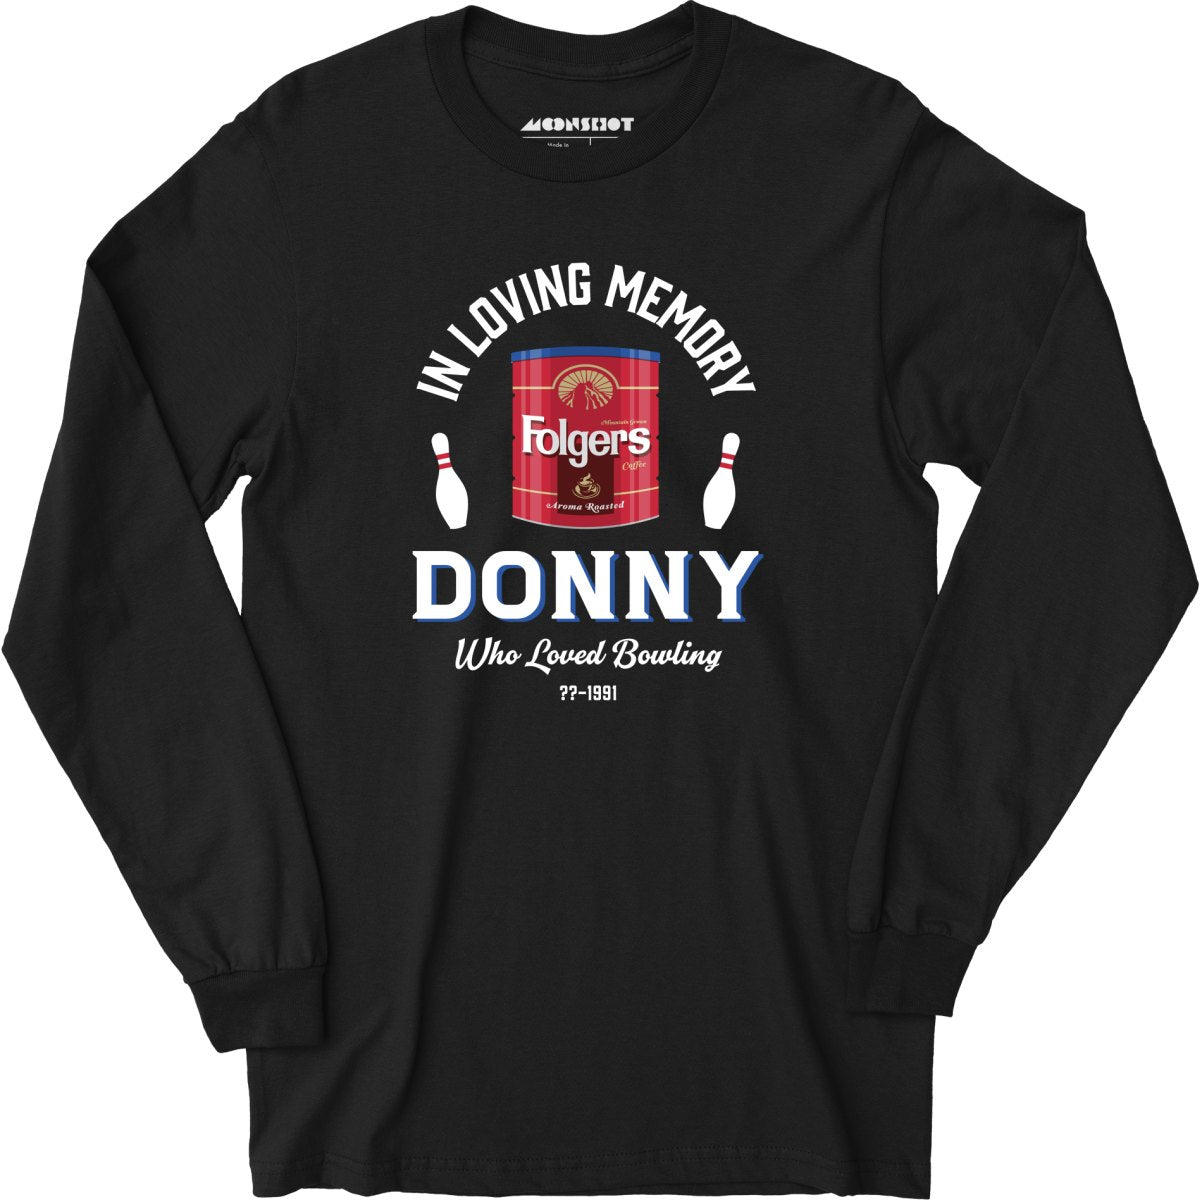 Donny Who Loved Bowling - Long Sleeve T-Shirt